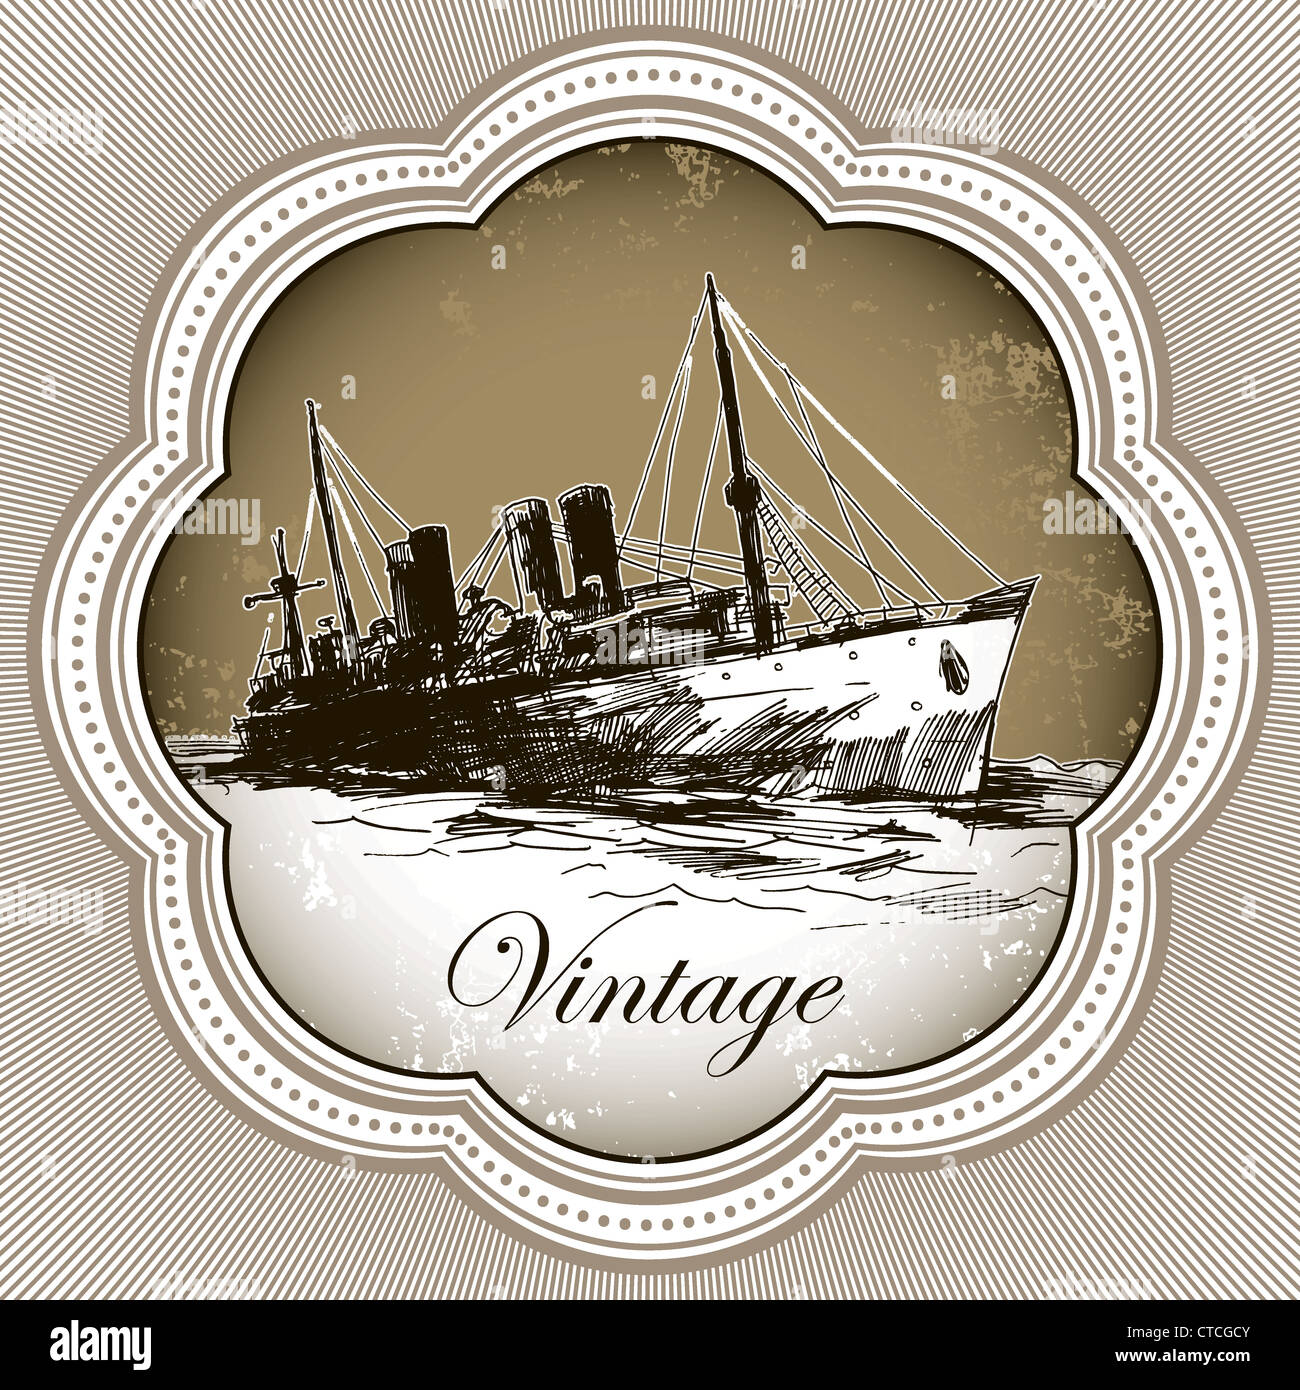 Vintage banner with old ship Stock Photo